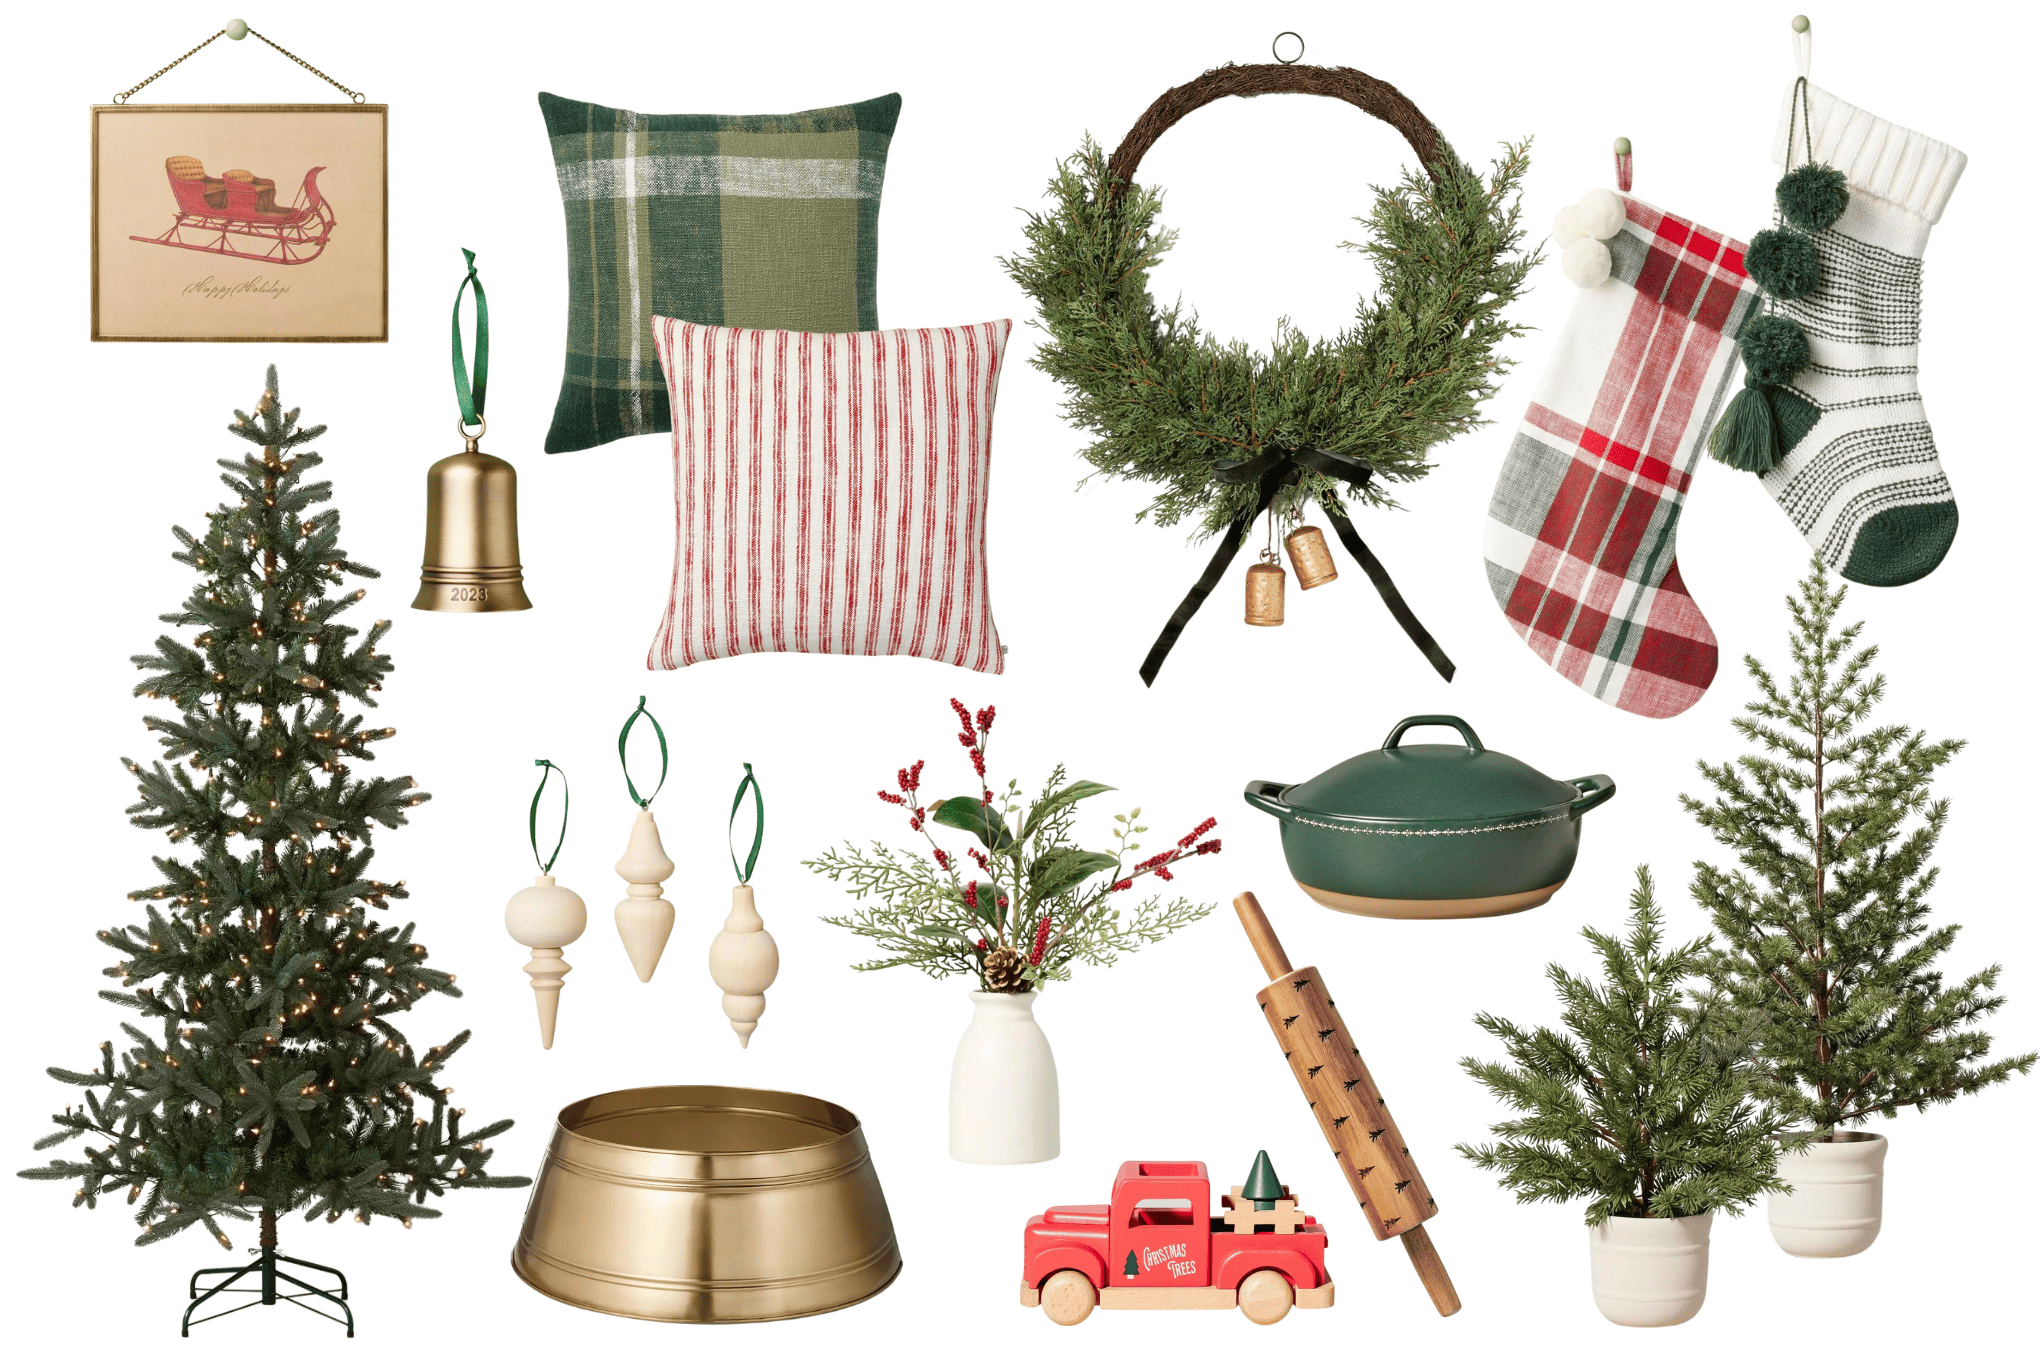 hearth and hand magnolia at target best decor for Christmas